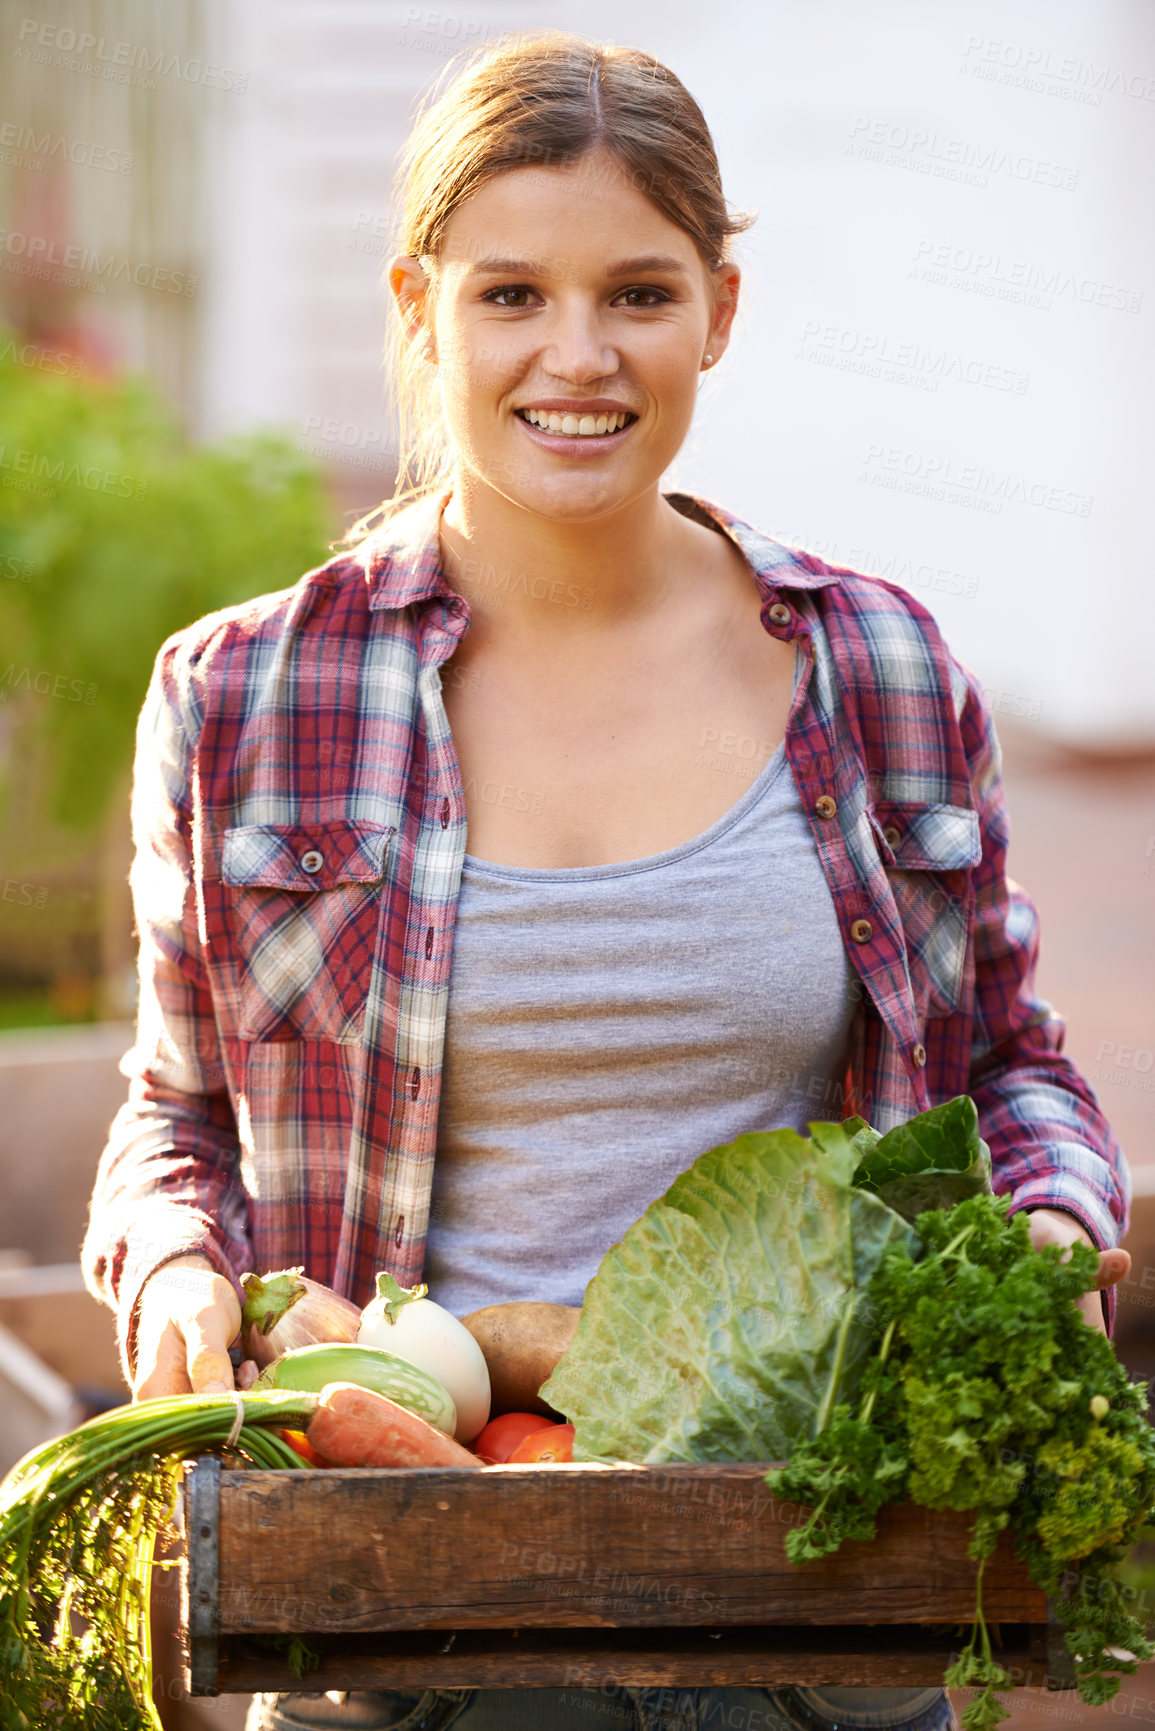 Buy stock photo Happy woman, portrait and harvester with box of vegetables from garden or farming of crops and resources. Female person with smile holding a crate of organic veg, natural growth or fresh produce